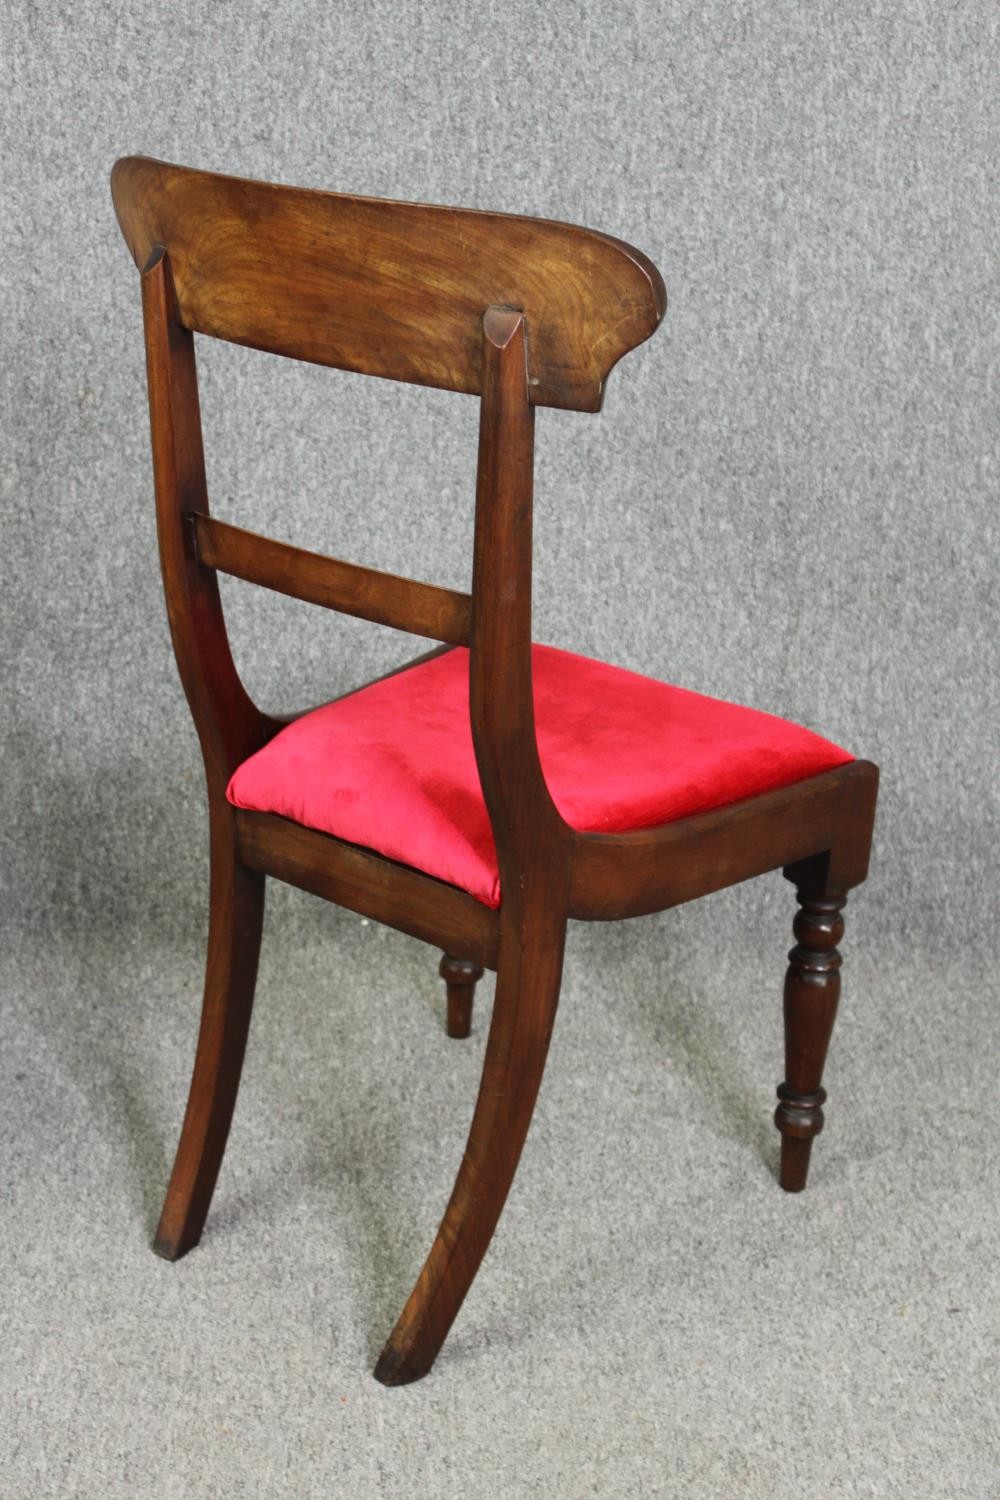 Dining chairs, a pair, mid 19th century mahogany. - Image 5 of 7